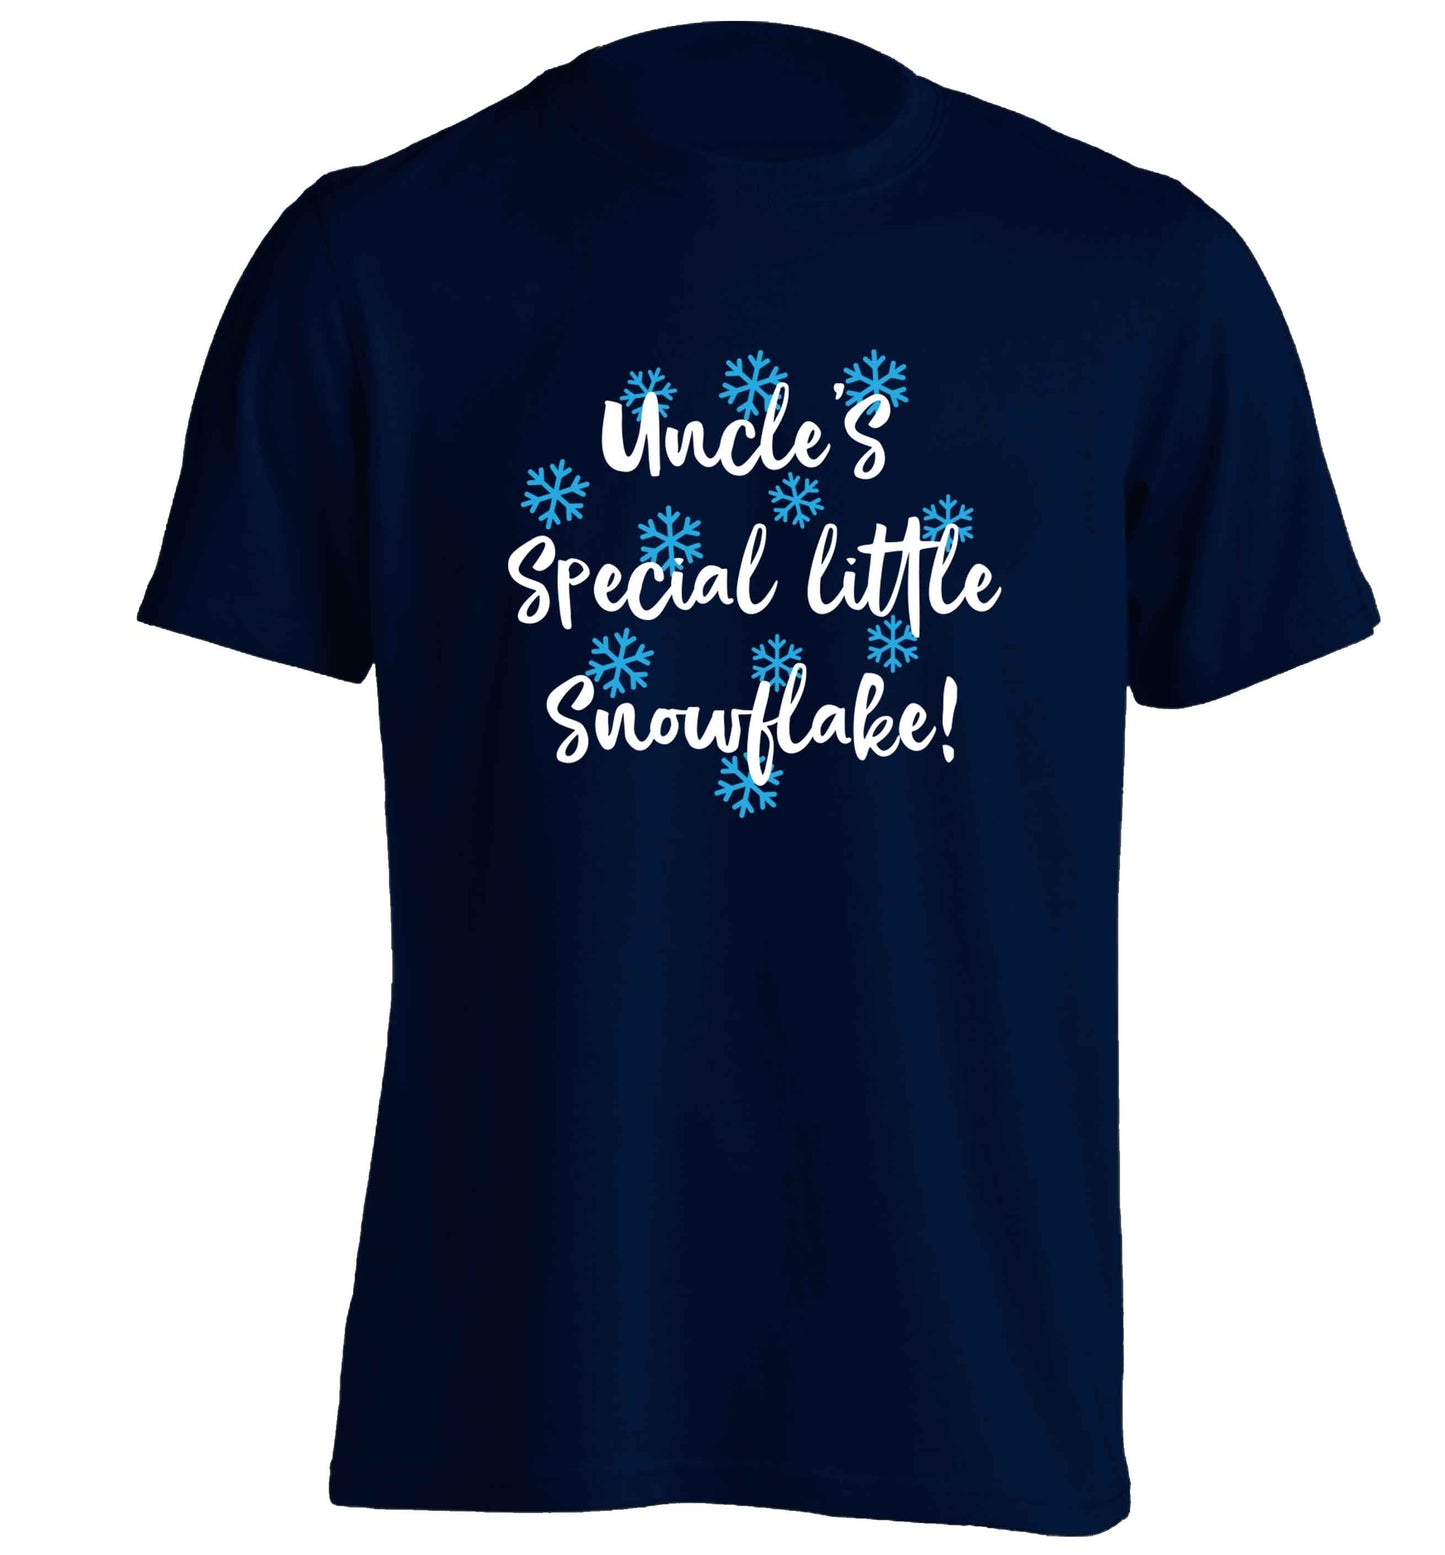 Uncle's special little snowflake adults unisex navy Tshirt 2XL